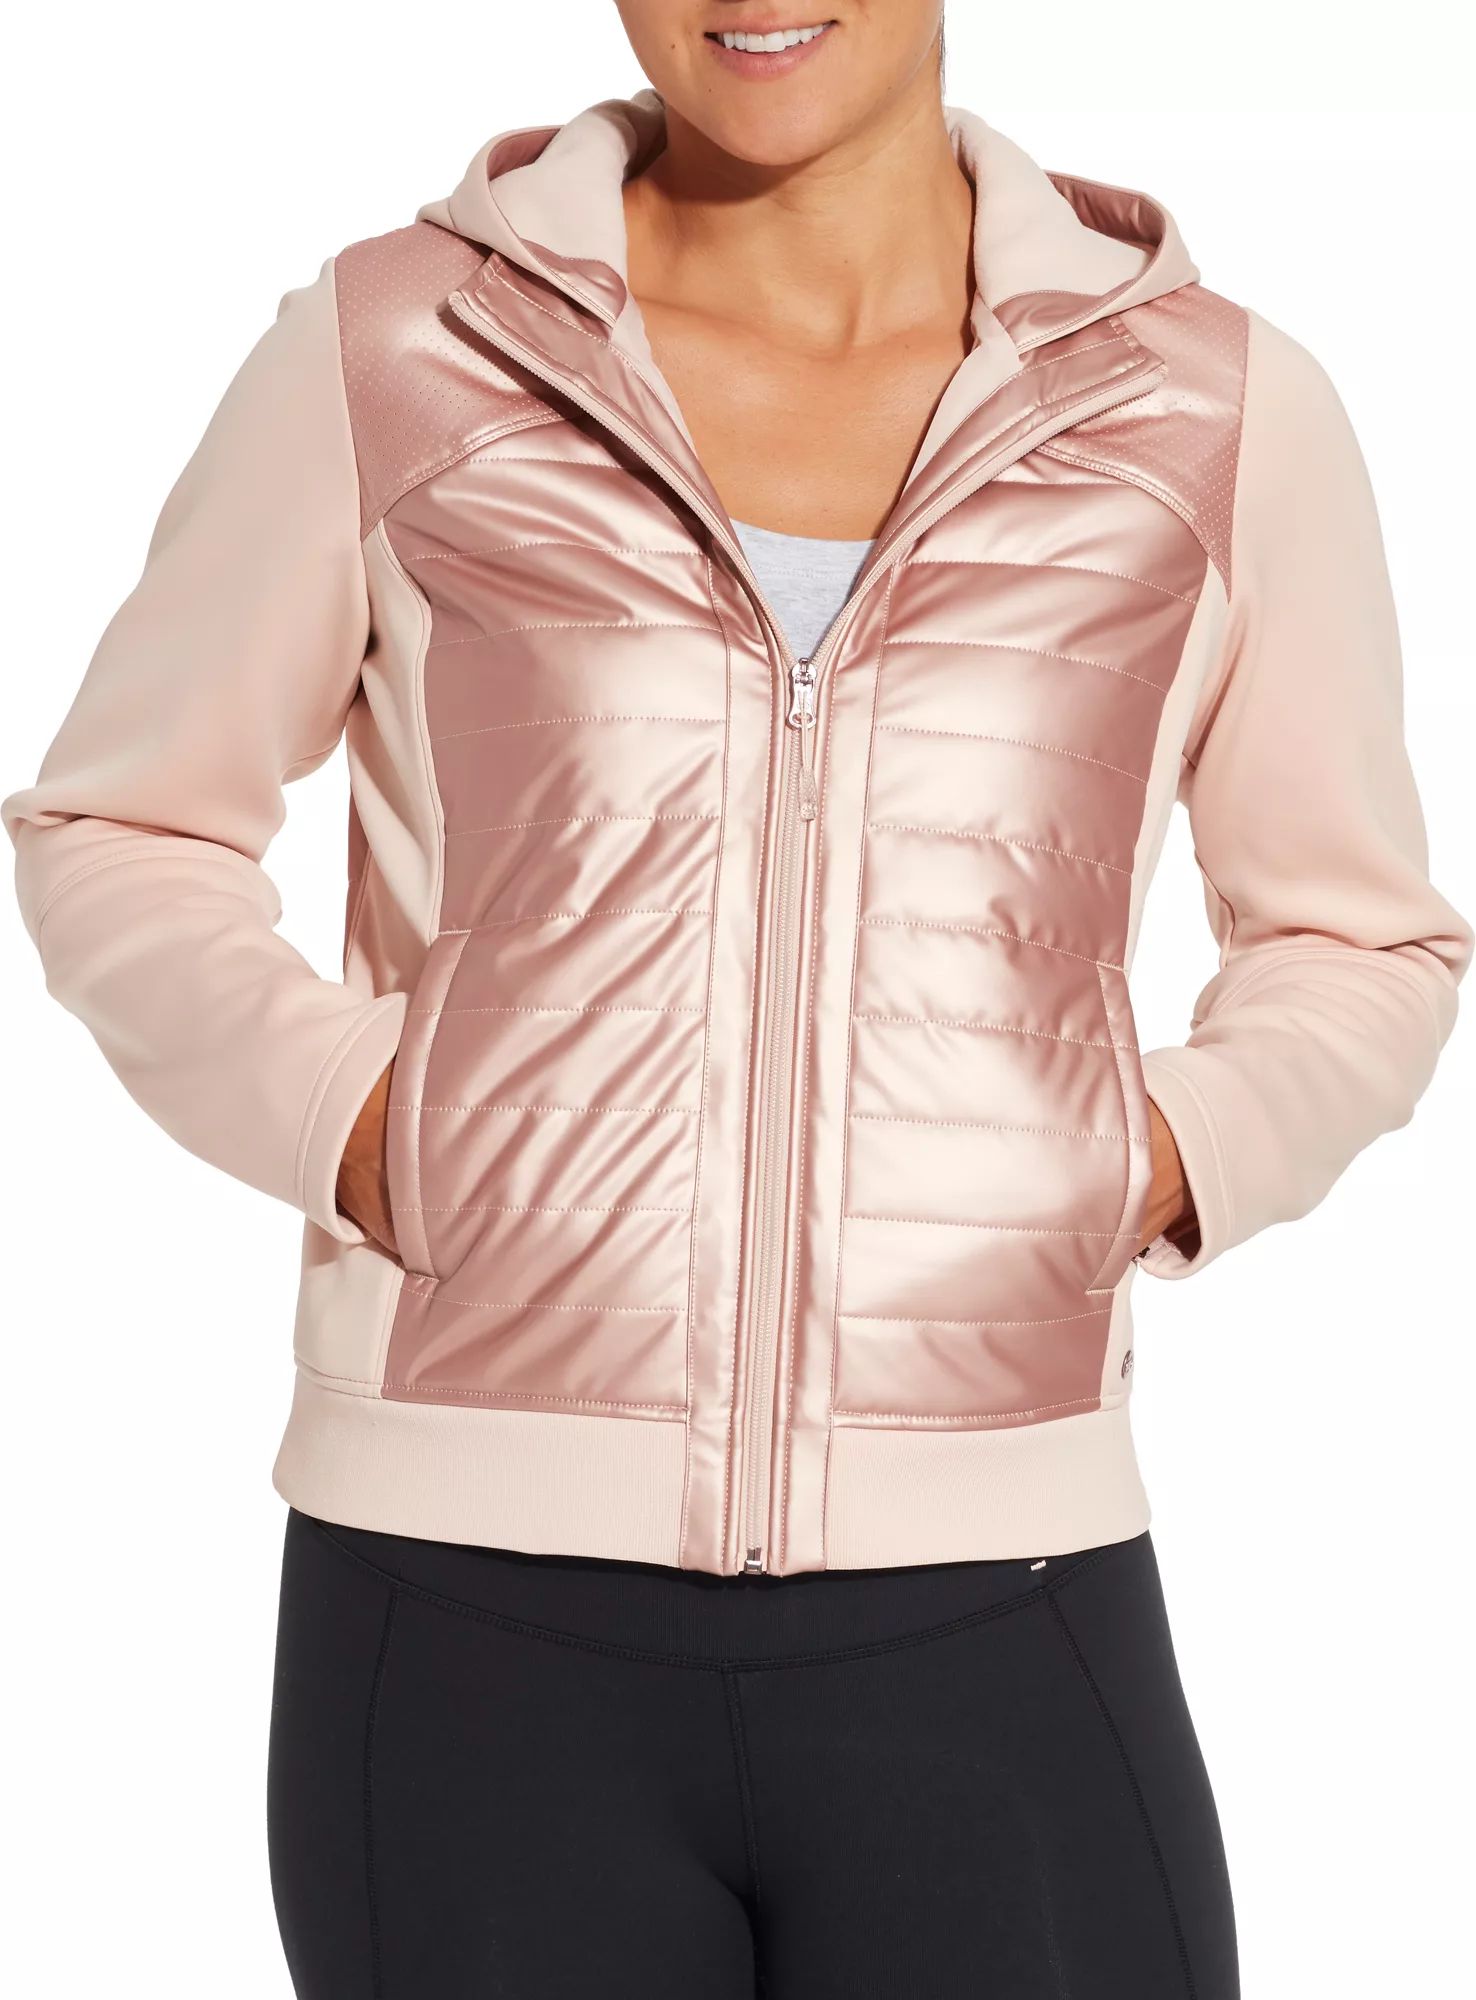 Calia by Carrie Underwood Moto Hybrid Jacket, Women's, Size: XS, Cameo Rose | Dick's Sporting Goods